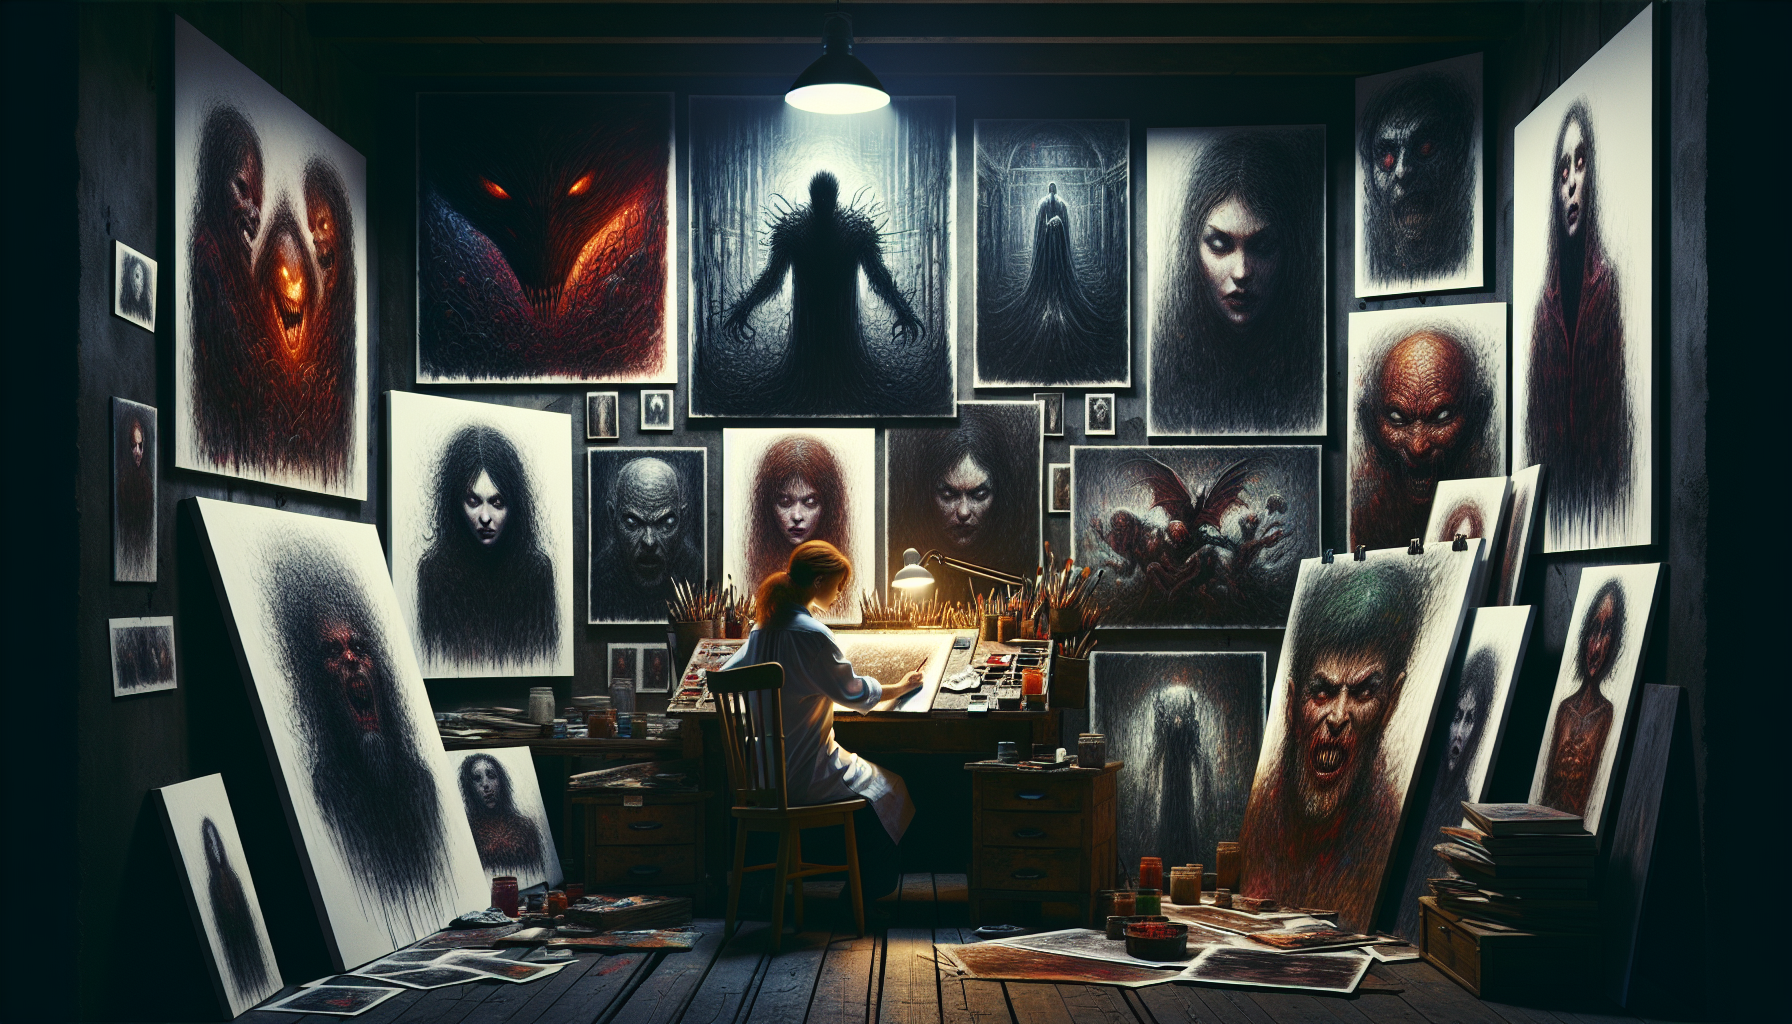 An artist's studio with dim lighting, where an author sits at a cluttered desk, brainstorming. On large canvases around the room, vivid and dark horror-themed illustrations are displayed, each showcas